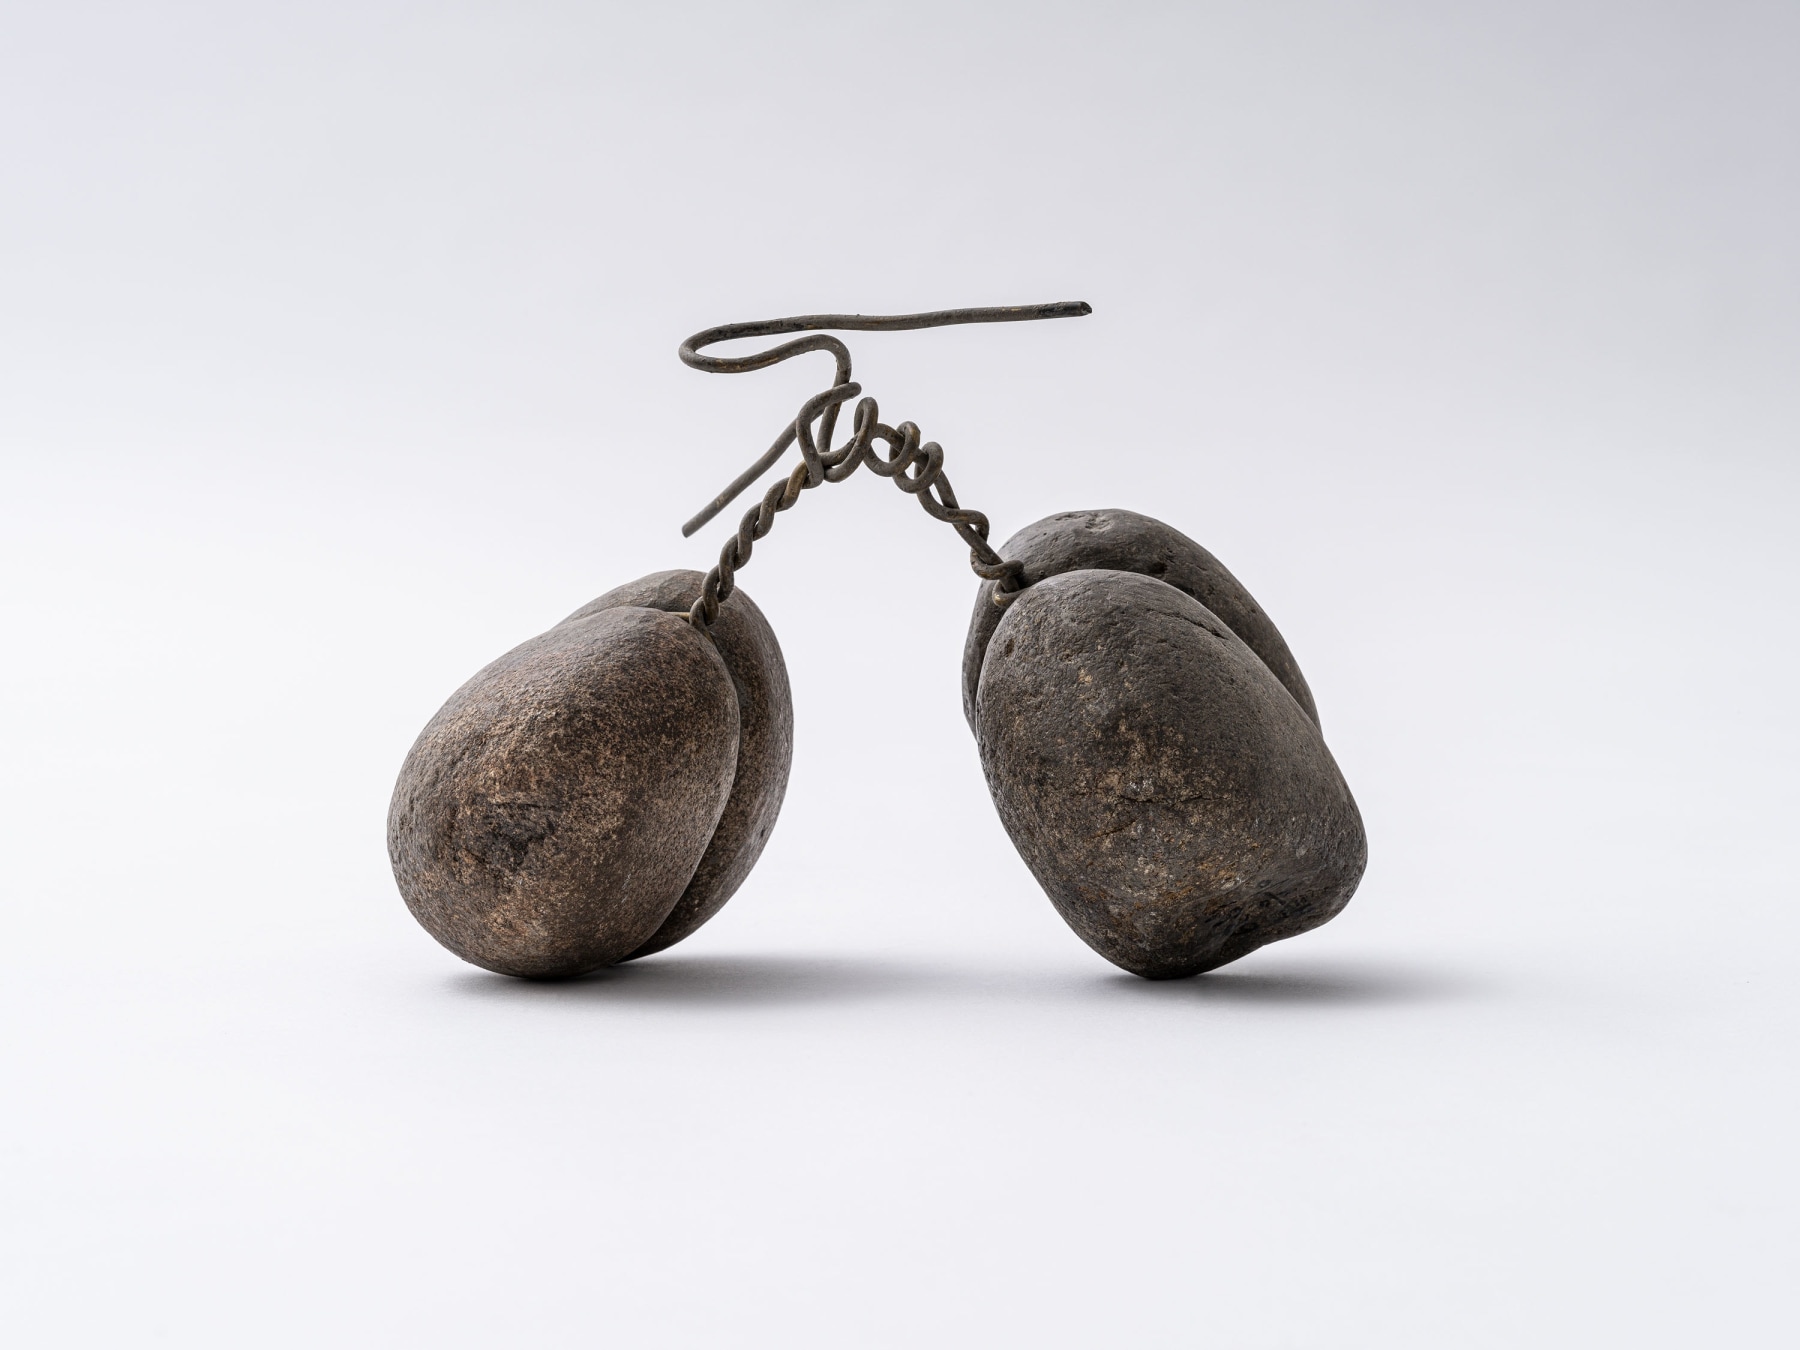 Seung-taek Lee

&amp;ldquo;Tied Stone&amp;rdquo;, 1989

Stone, wire

8 1/4 x 10 1/2 x 6 1/2 inches

21 x 27 x 16.5 cm

LEE 38

$35,000